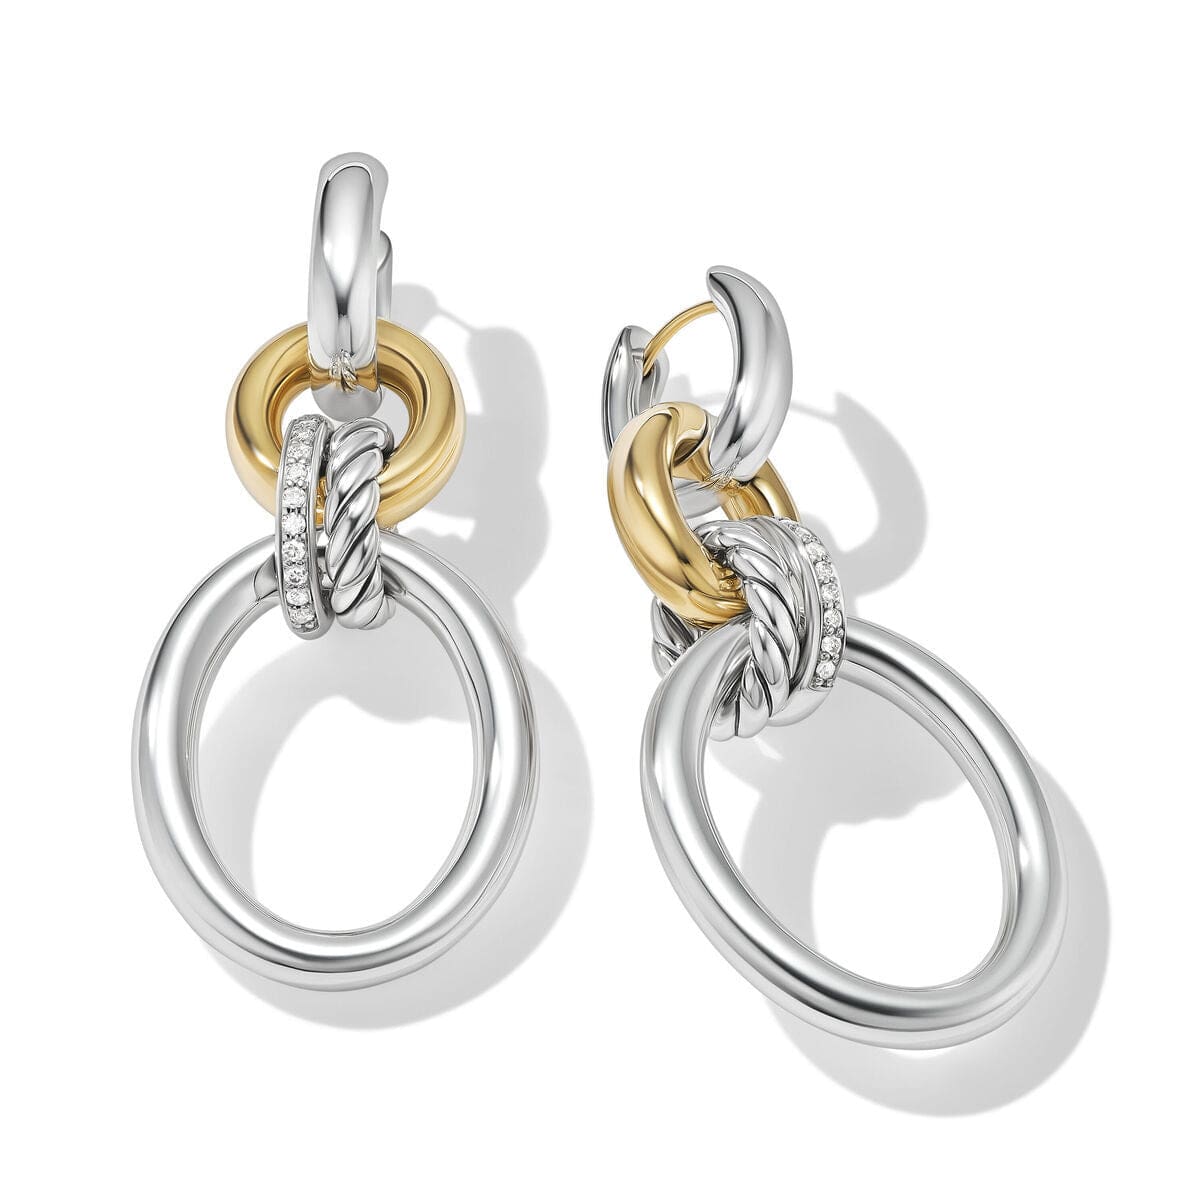 DY Mercer™ Circular Drop Earrings in Sterling Silver with 18K Yellow Gold and Pavé Diamonds